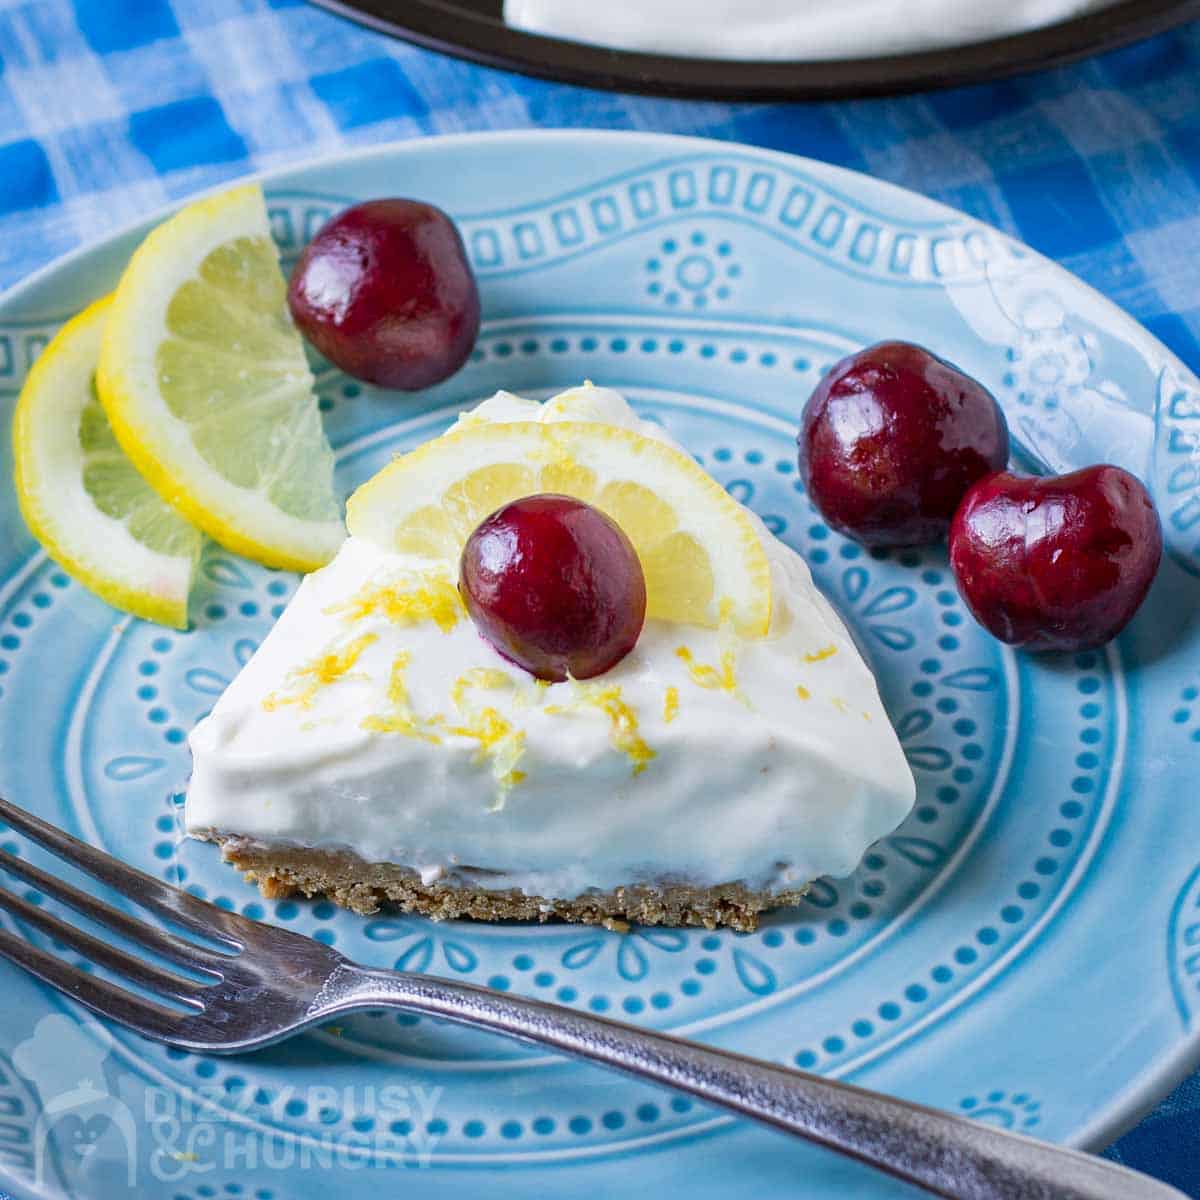 Close up shot of a slice of lemon pie garnished with a whole cherry on a blue plate with a fork, lemon slices, and more cherries on the side.